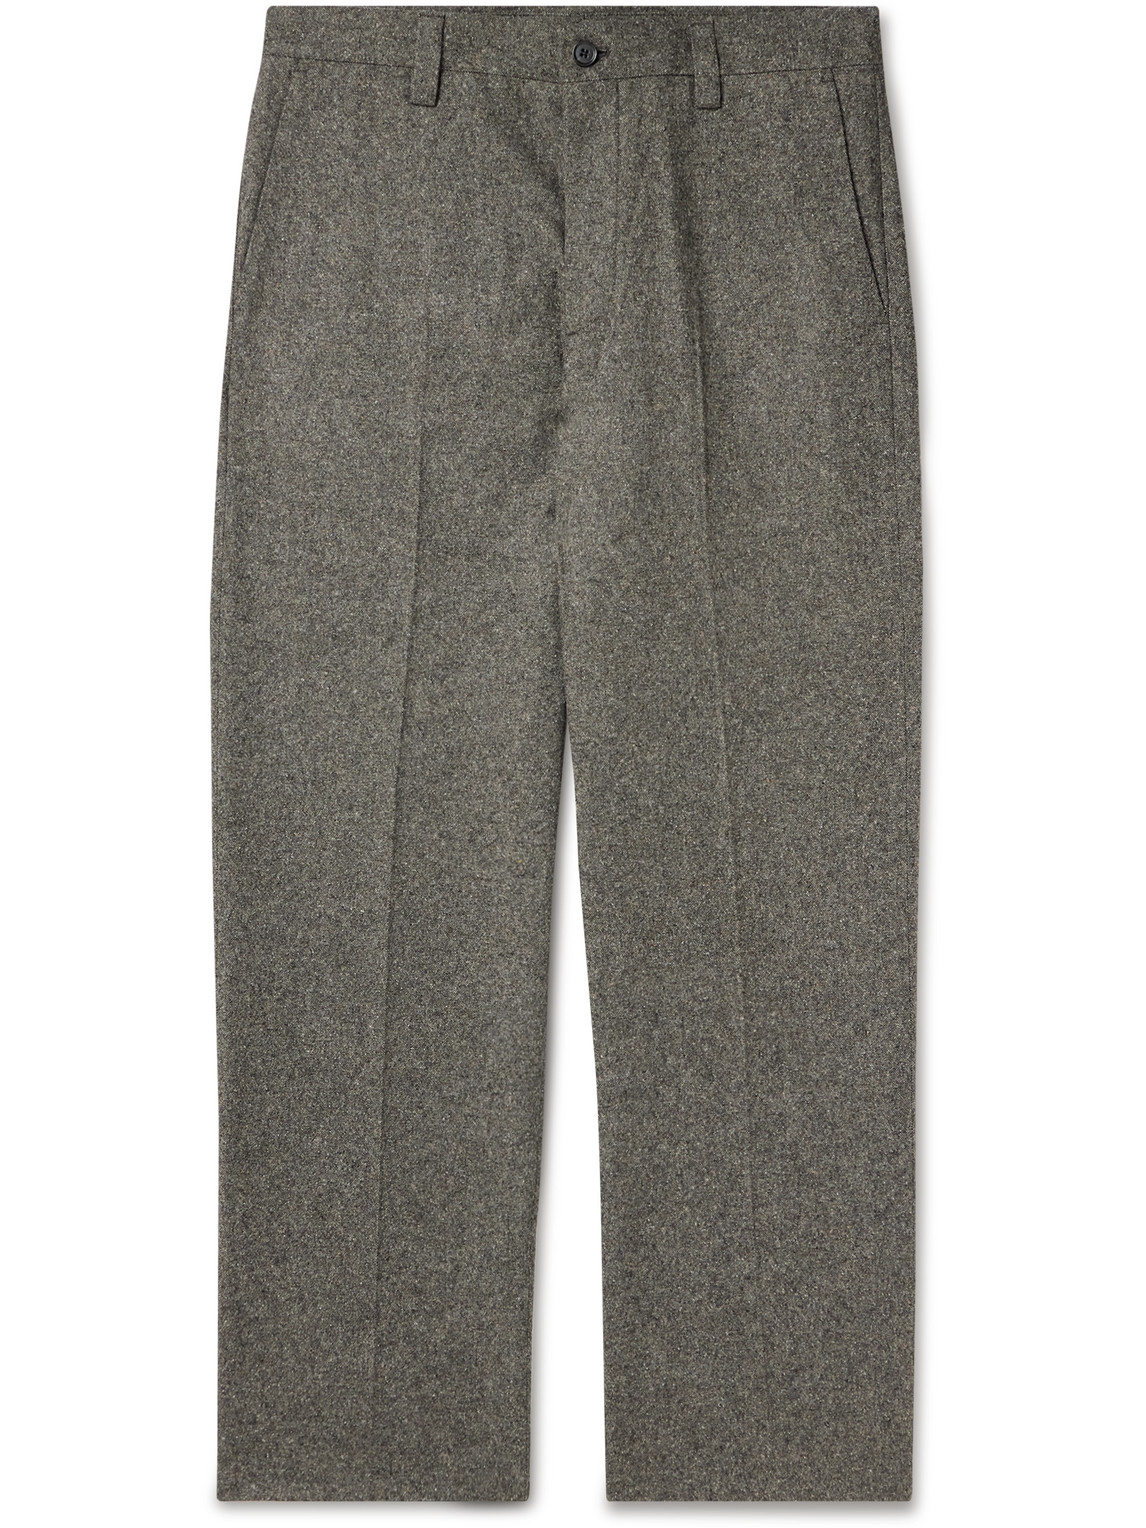 Throwing Fits Paw 1799 Straight-Leg Tweed Trousers